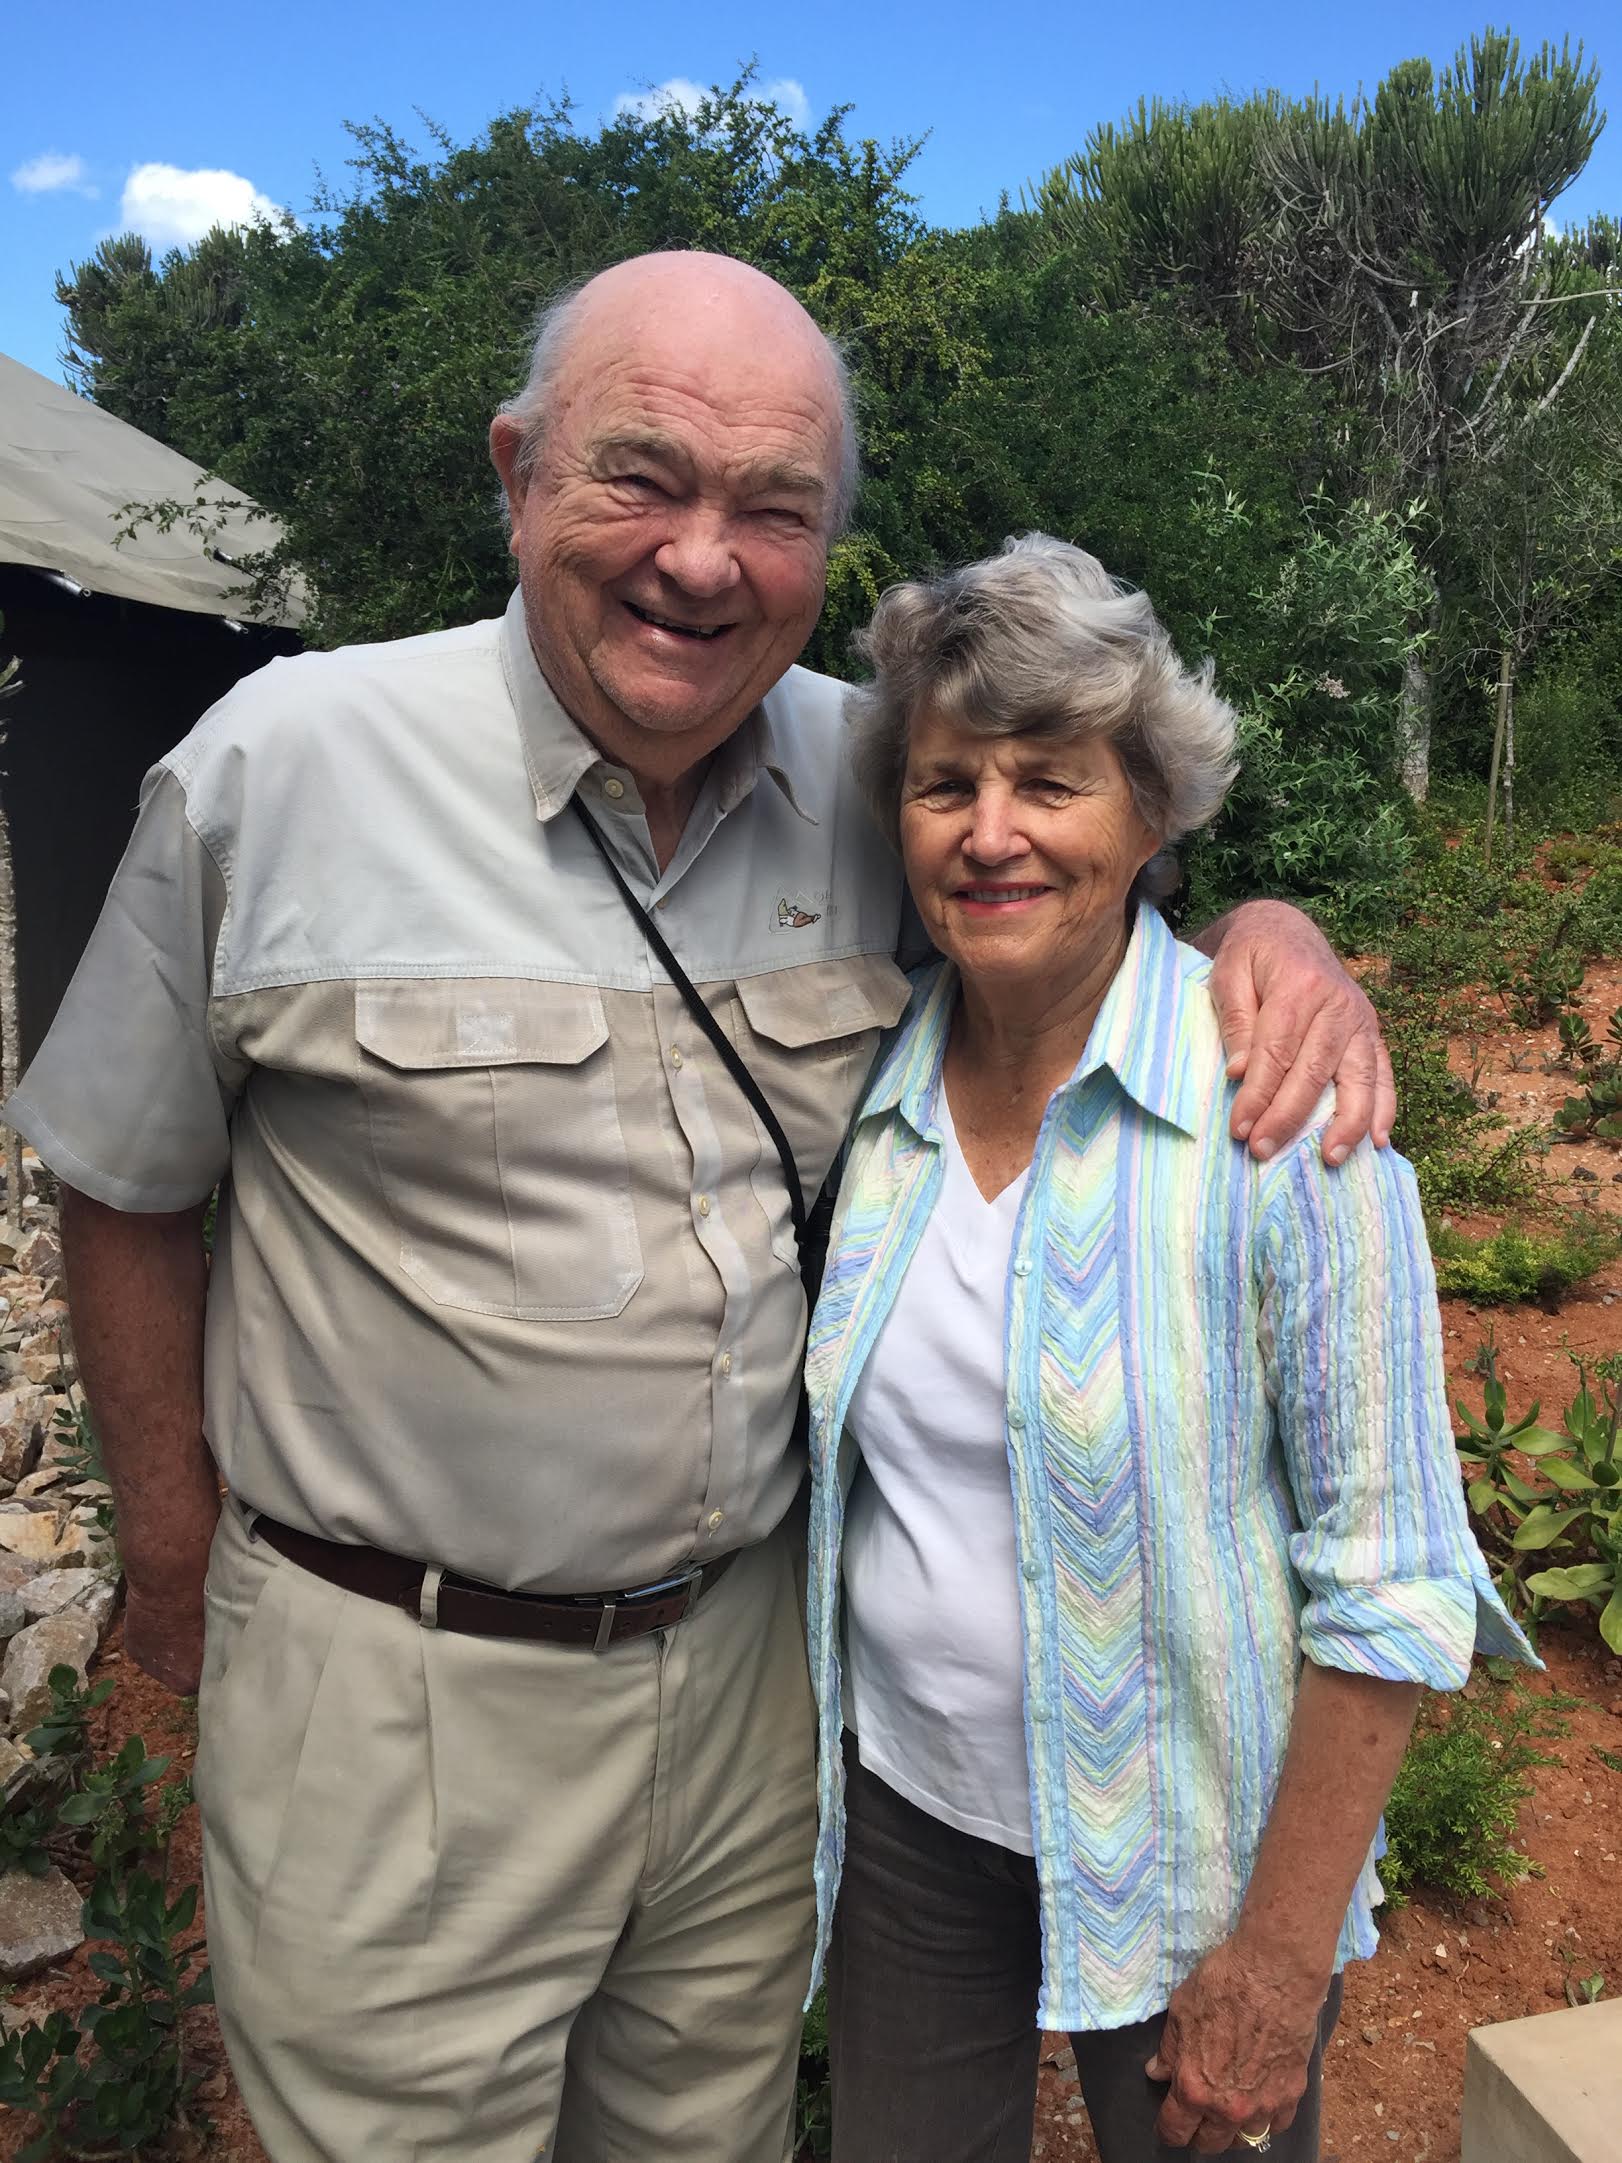 Game Reserve Founders Colin and Twinks Rushmere